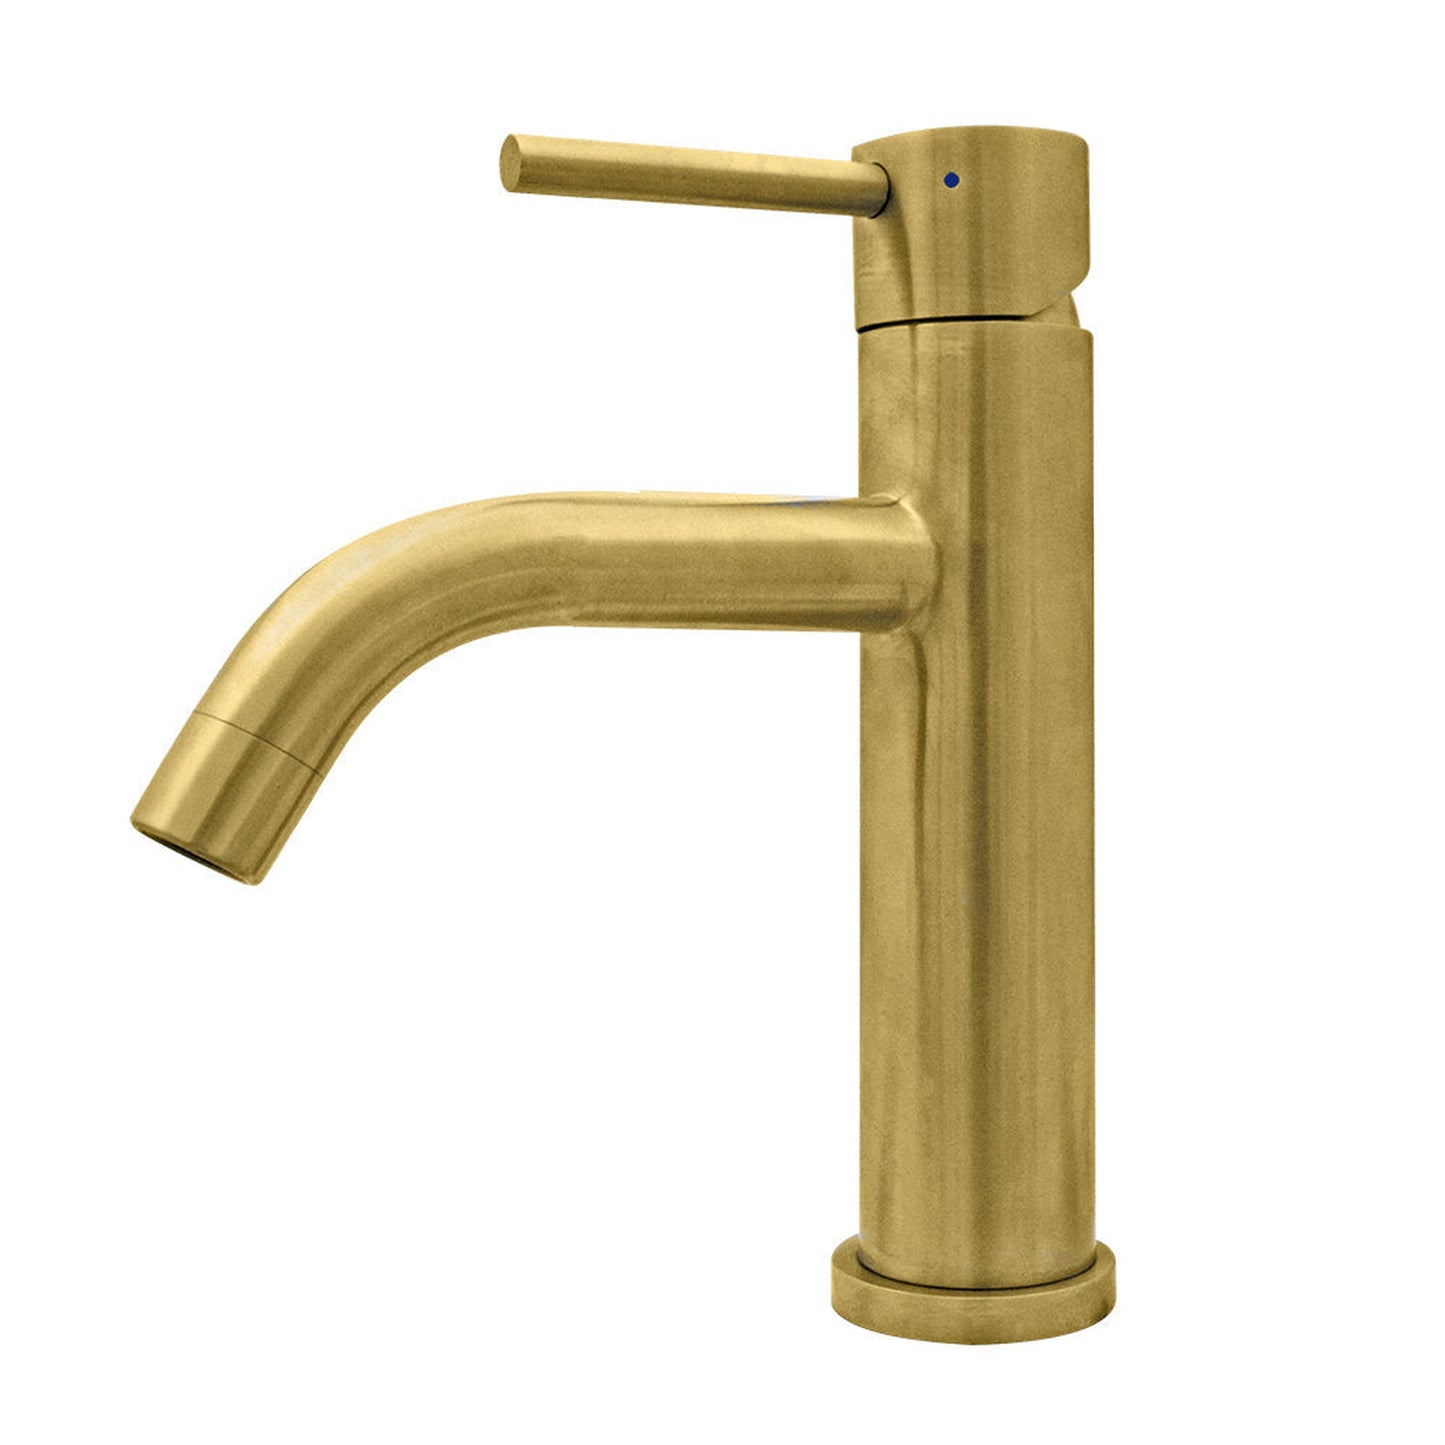 Whitehaus Waterhaus WHS8601-SB-B Brass Lead-Free Solid Stainless Steel Single Lever Elevated Lavatory Faucet